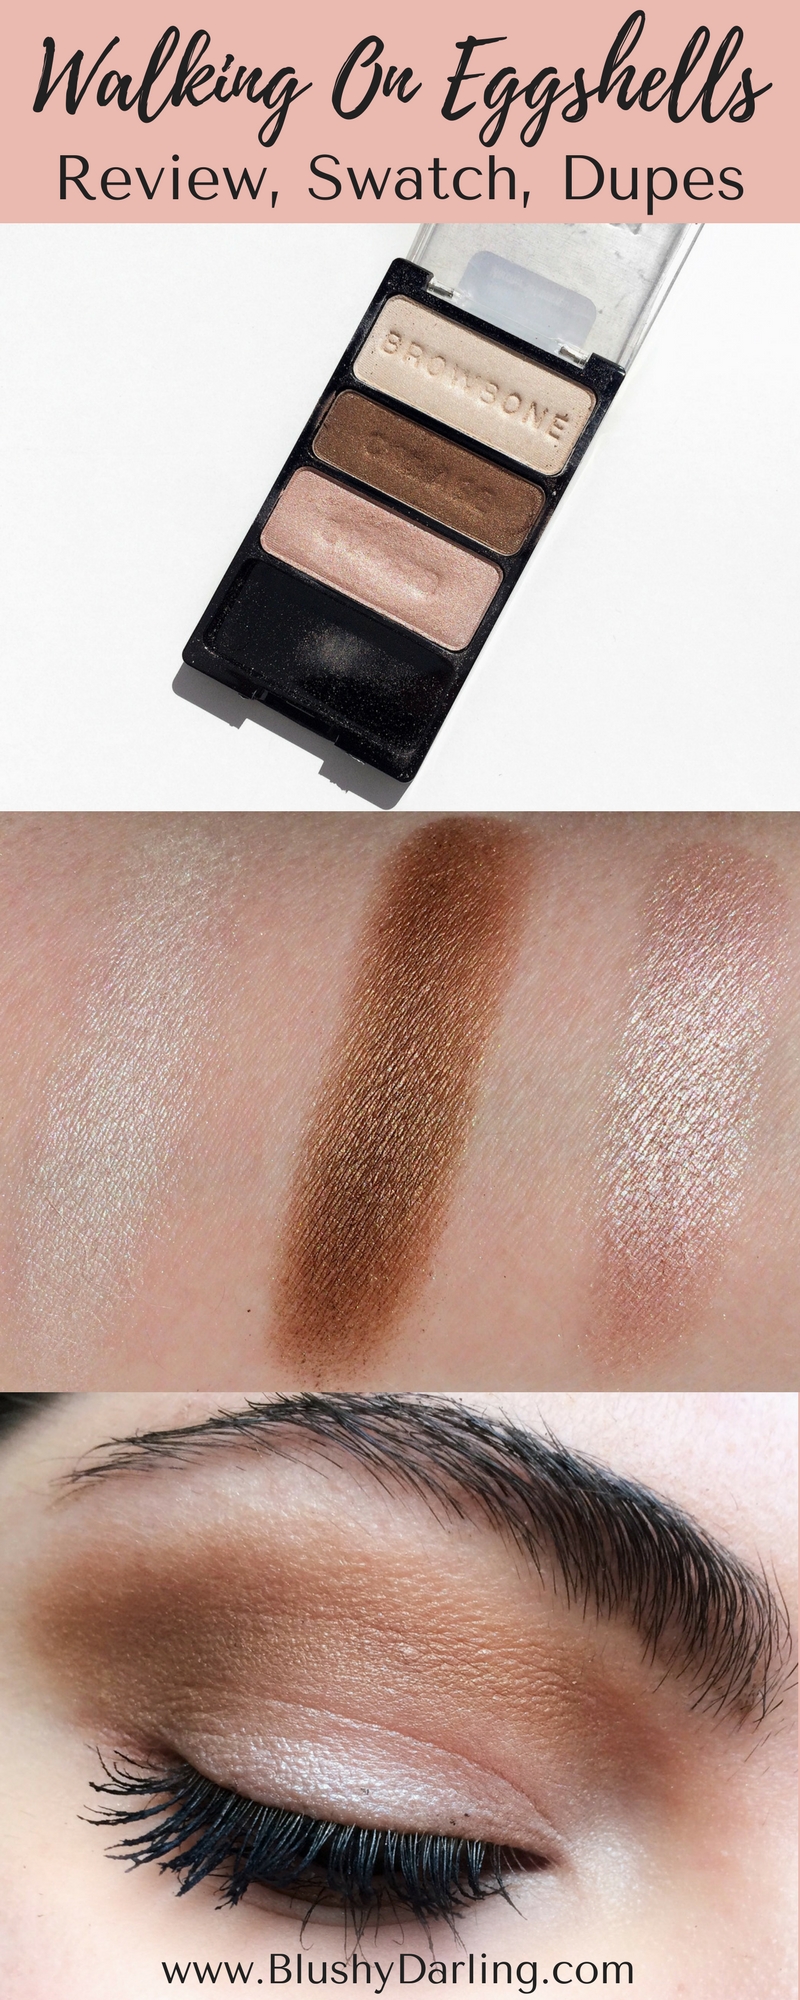 A drugstore eyeshadow that performs like high end but with an affordable price? Check the review to see if it's true.jpg